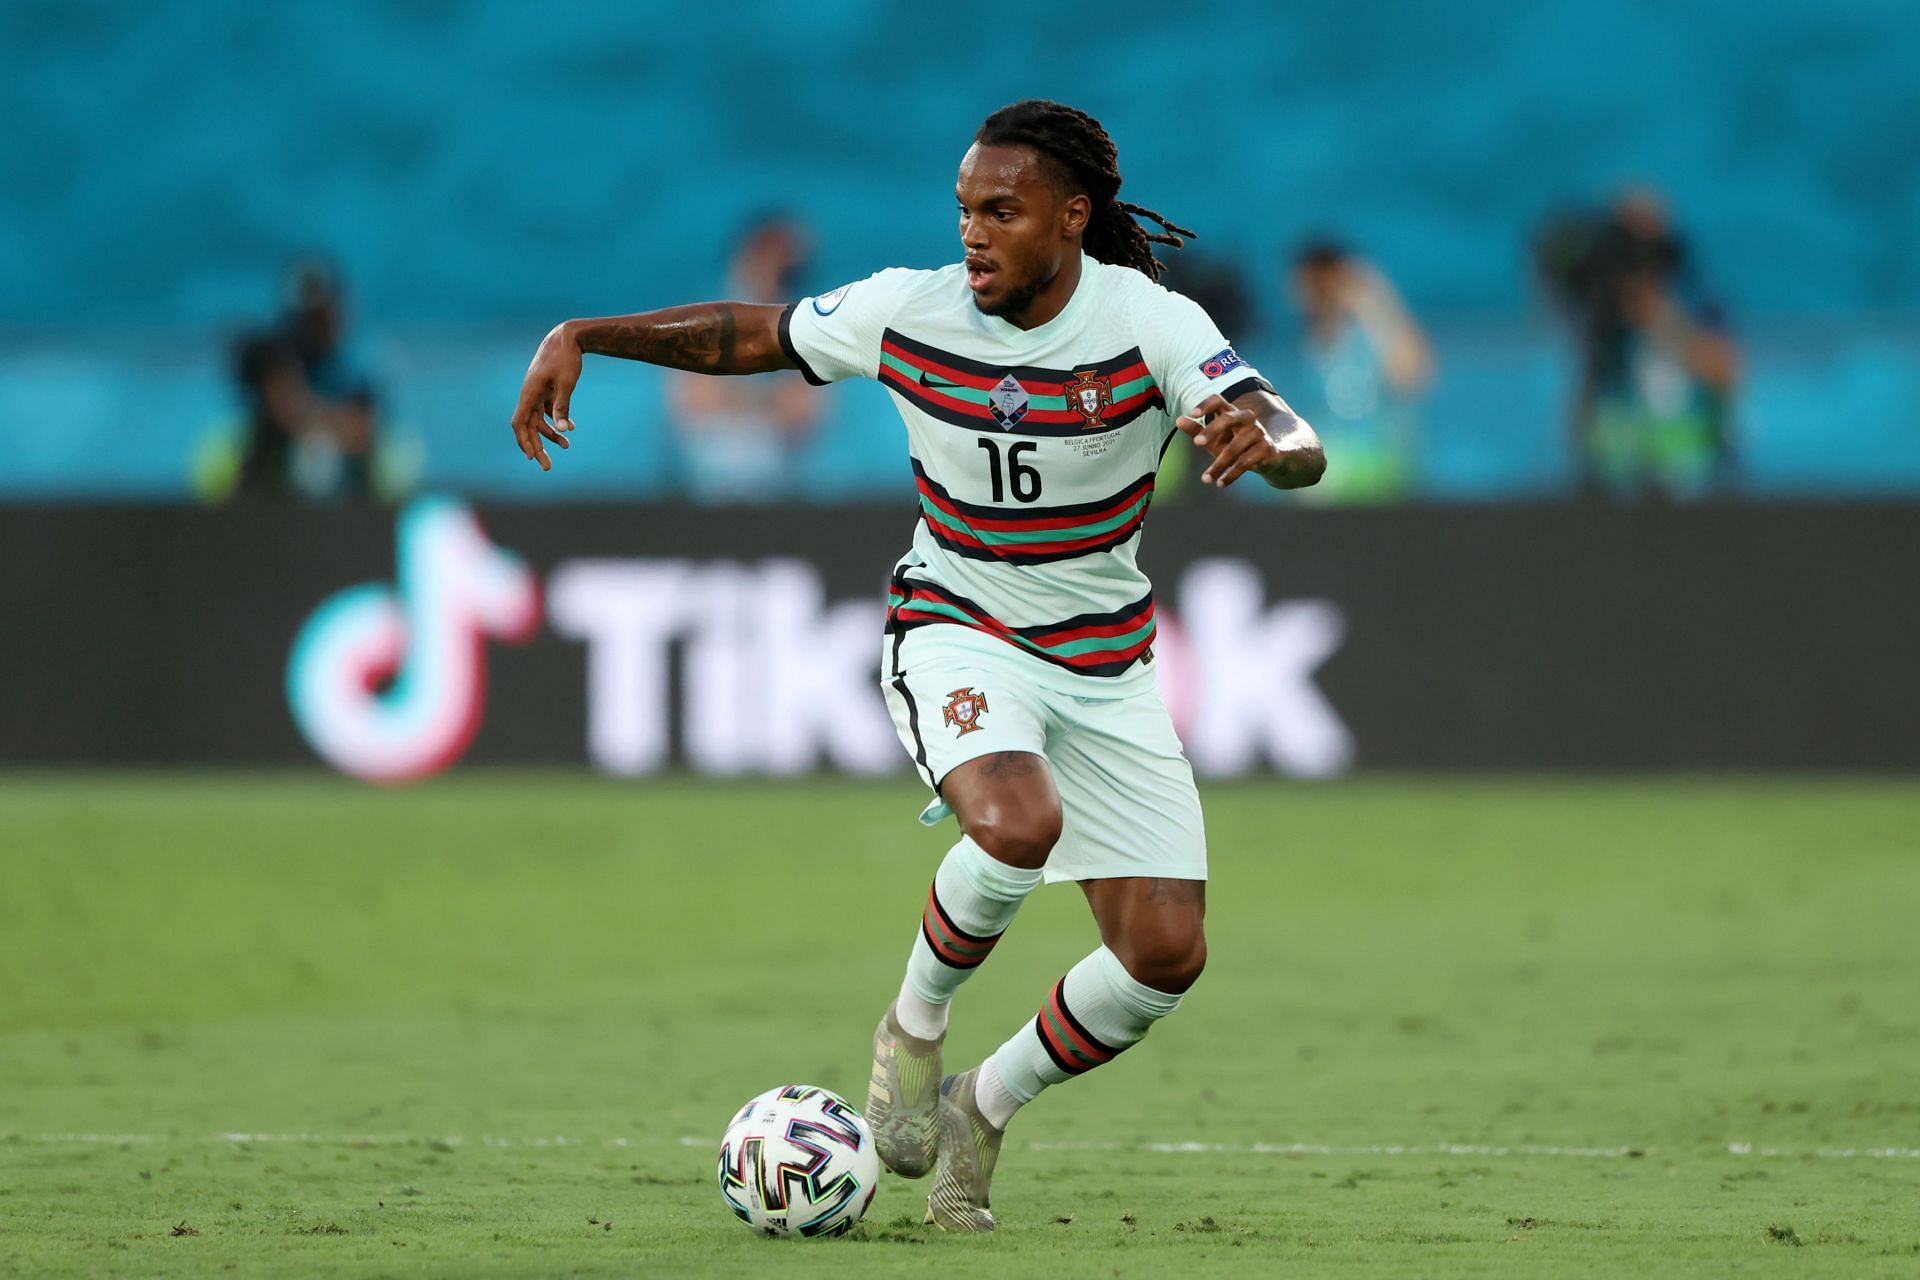 Renato Sanches will not be at 2022 FIFA World Cup